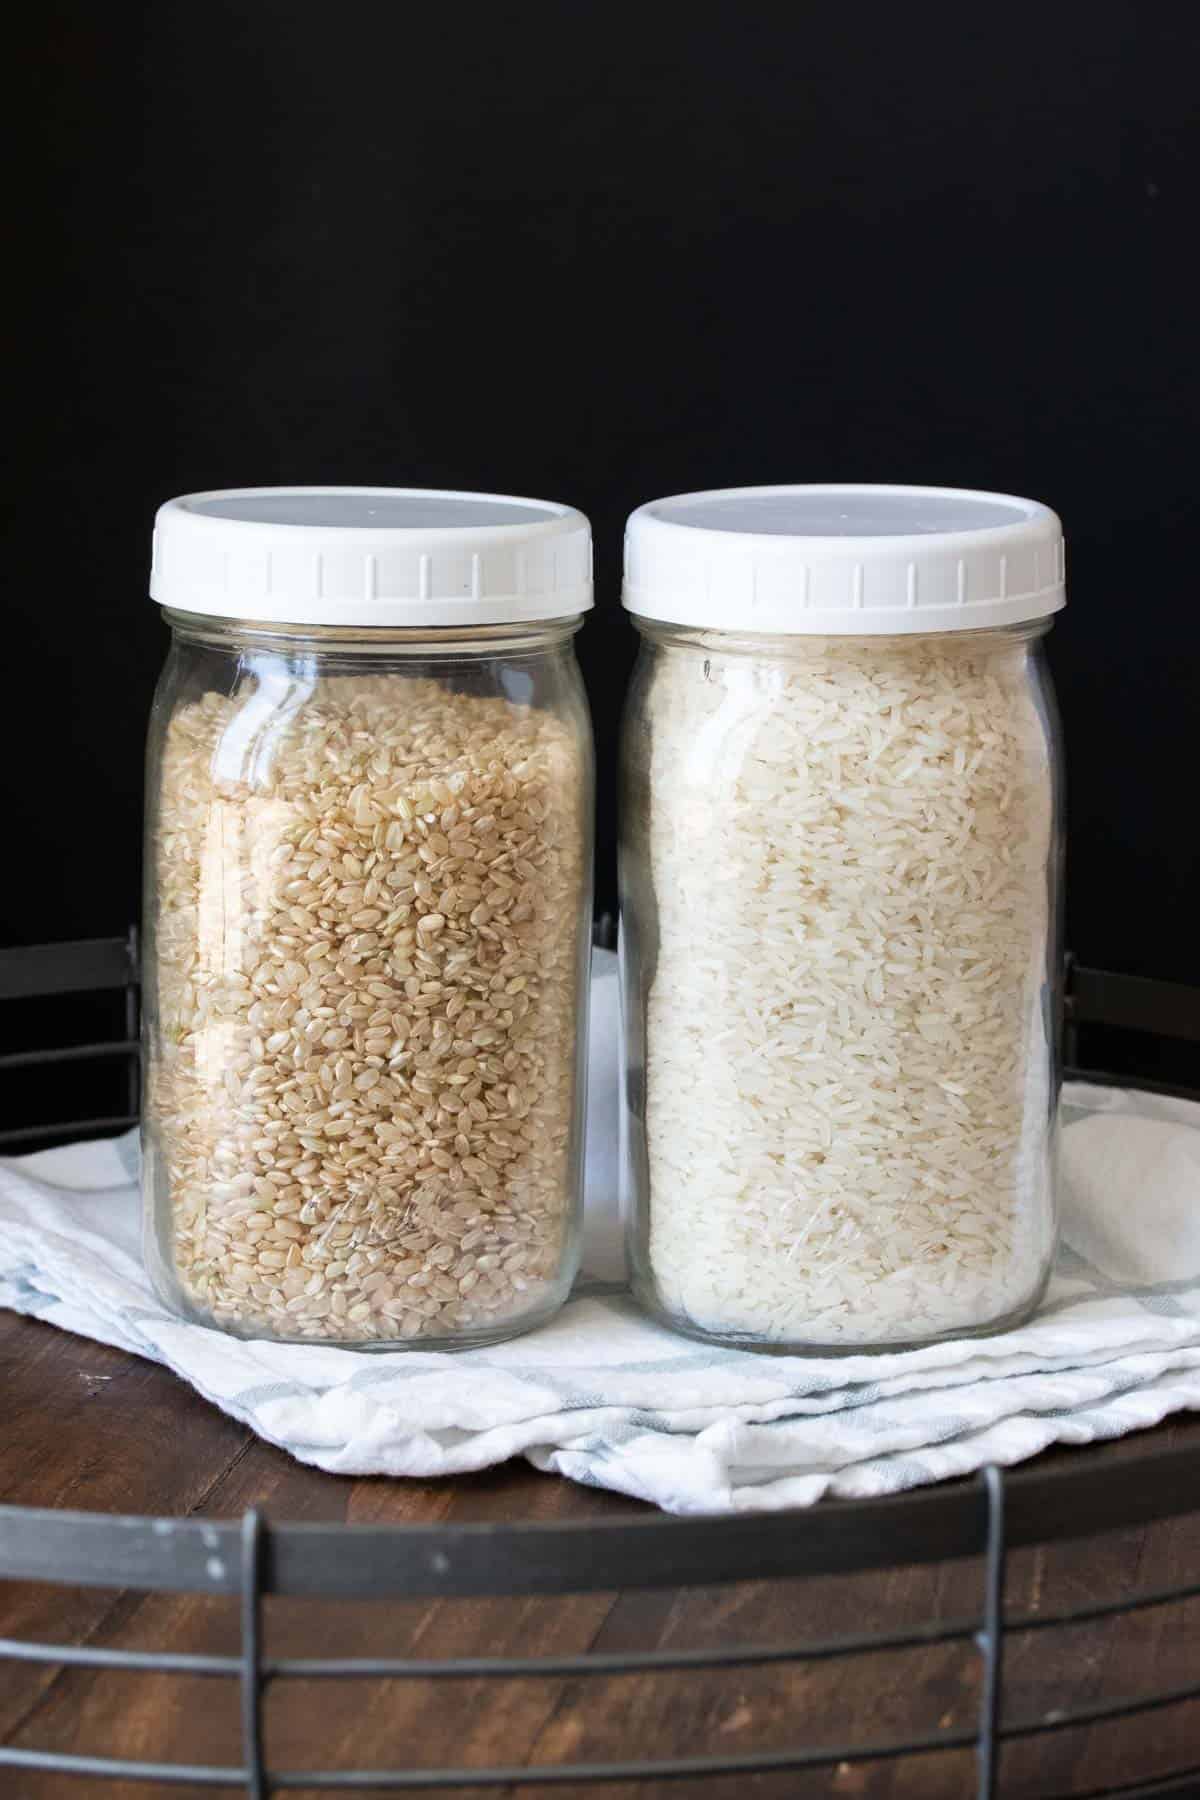 Two glass jars with white lids and different colors of rice inside